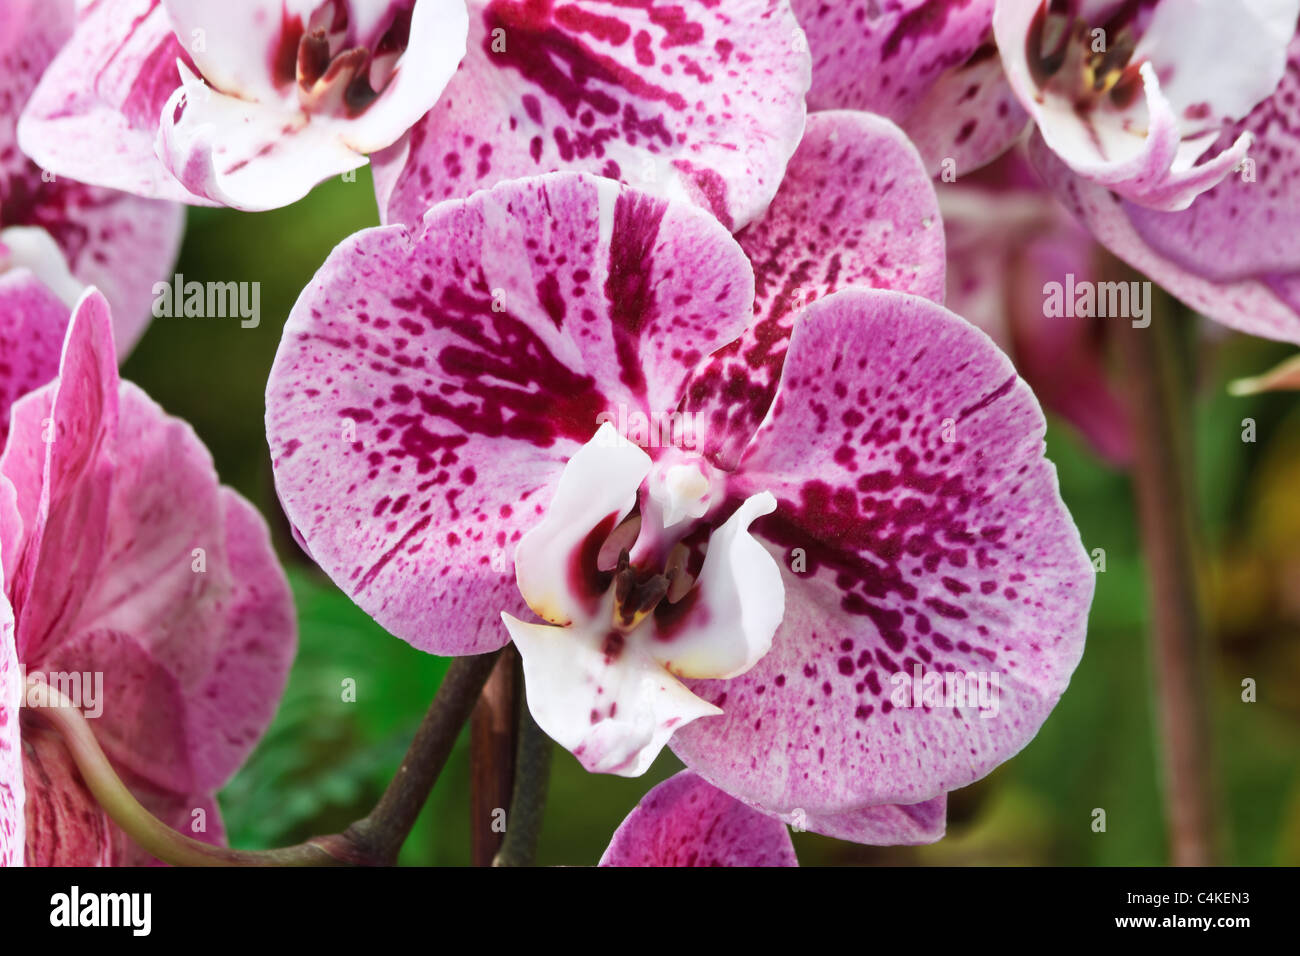 detail of hybrid orchid flower pink spotted purple Stock Photo